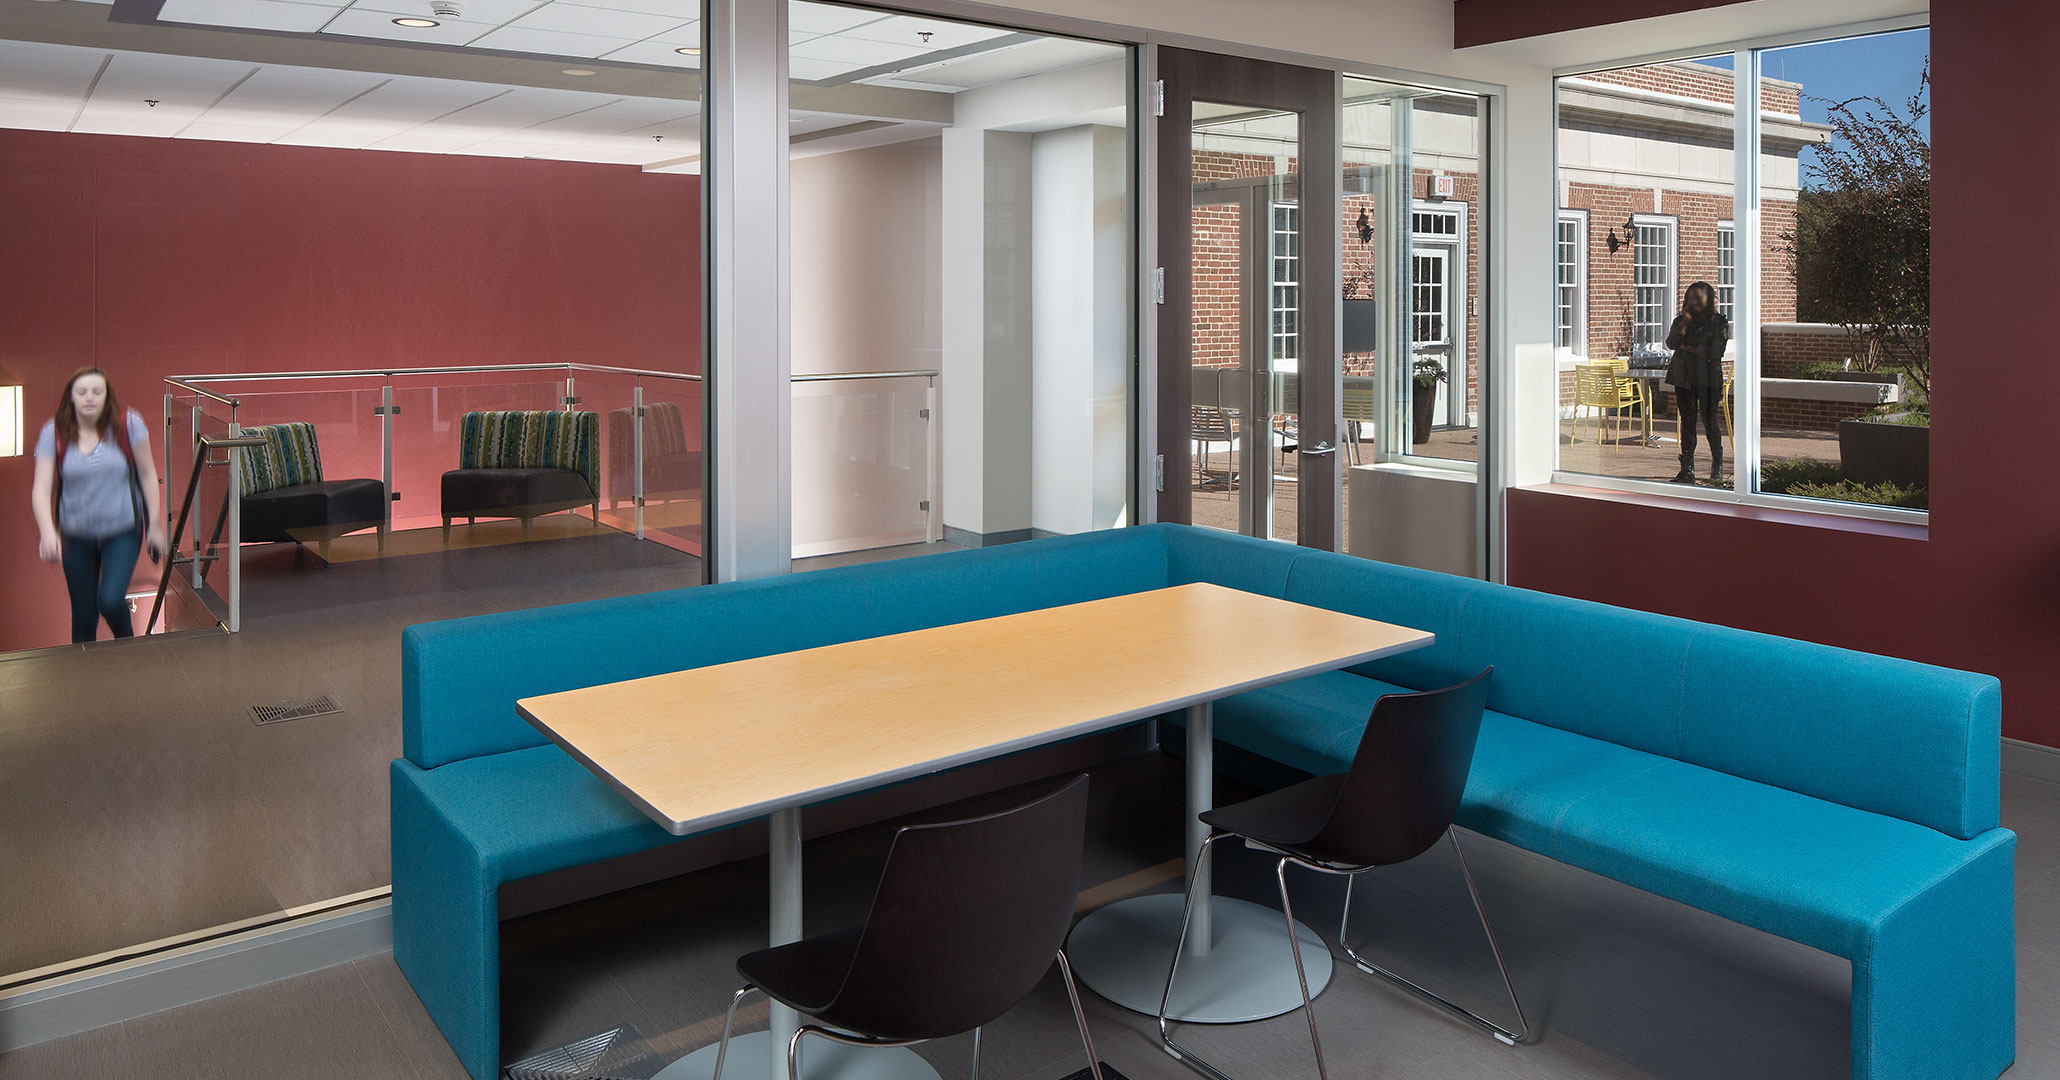 University of South Carolina worked with Boudreaux architects in Columbia, SC to design flexible student spaces.